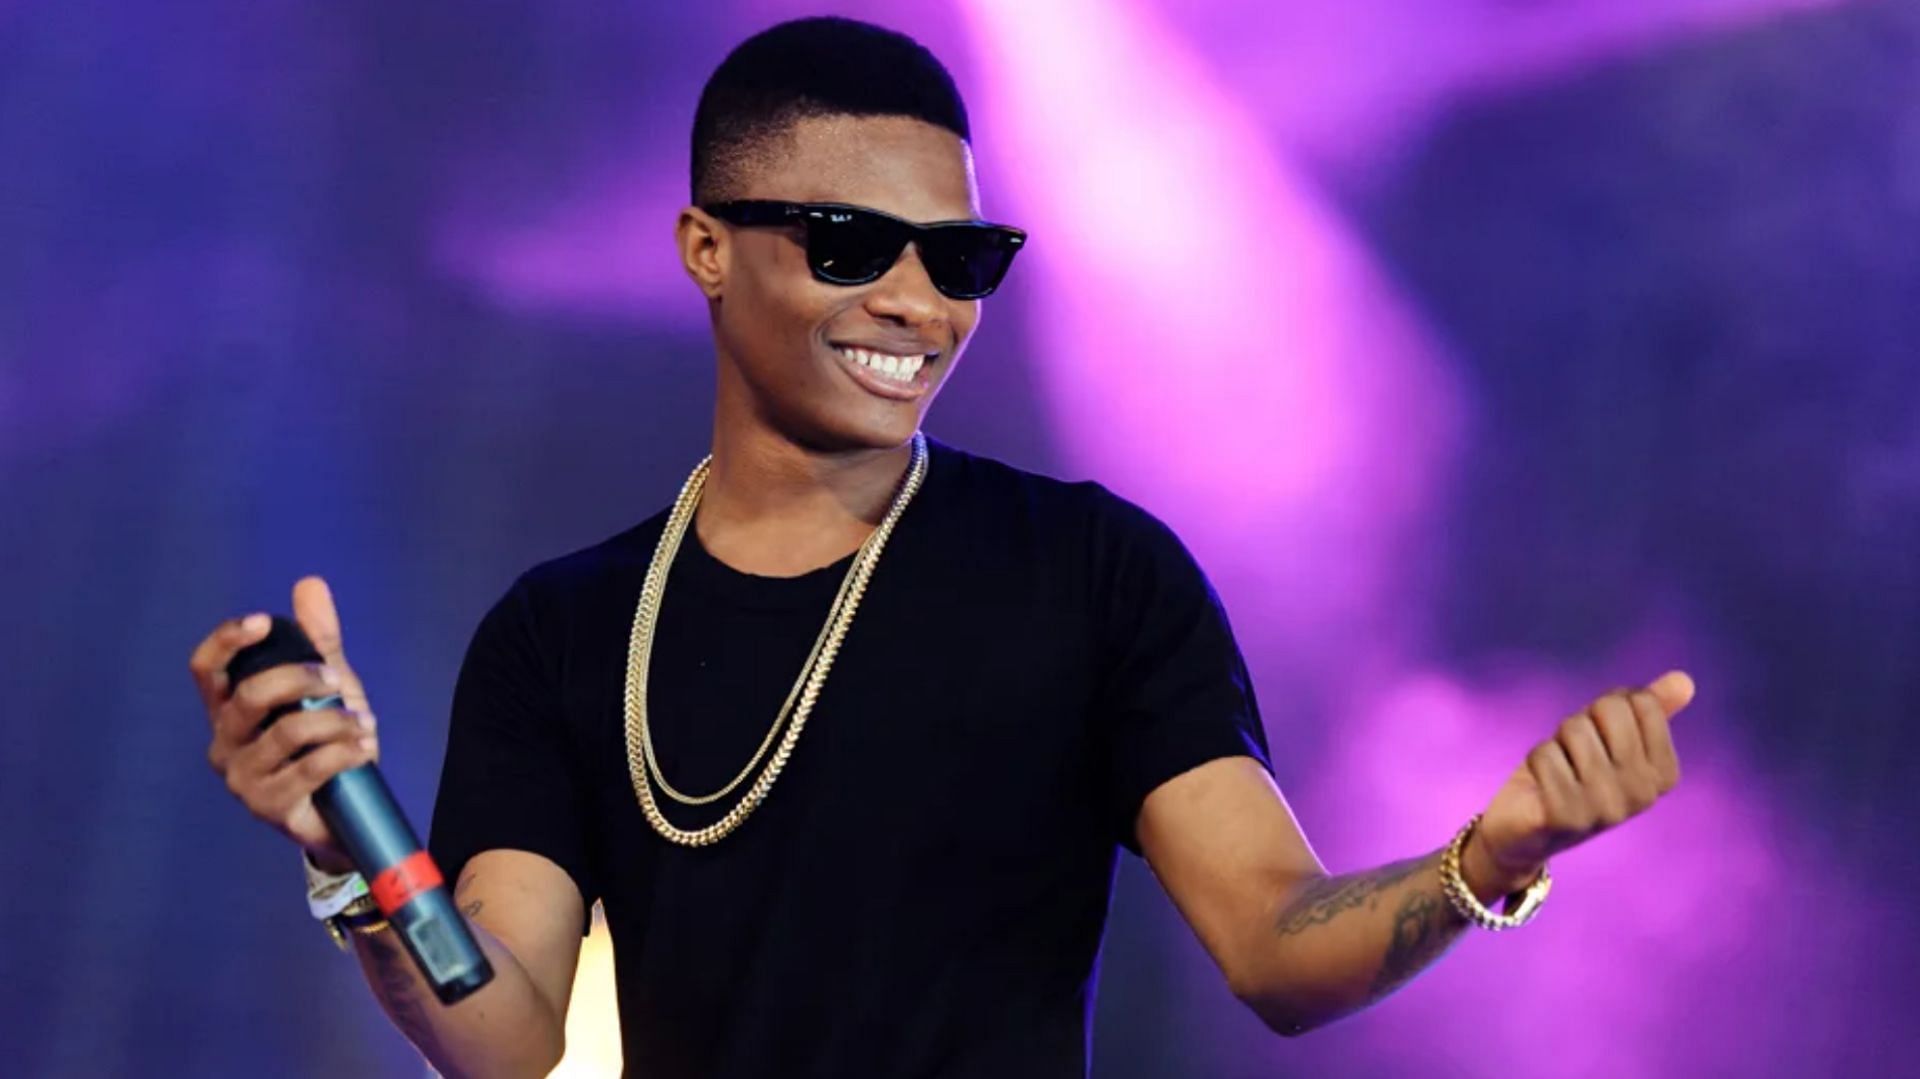 Wizkid has announced a tour for 2023. (Image via Getty)